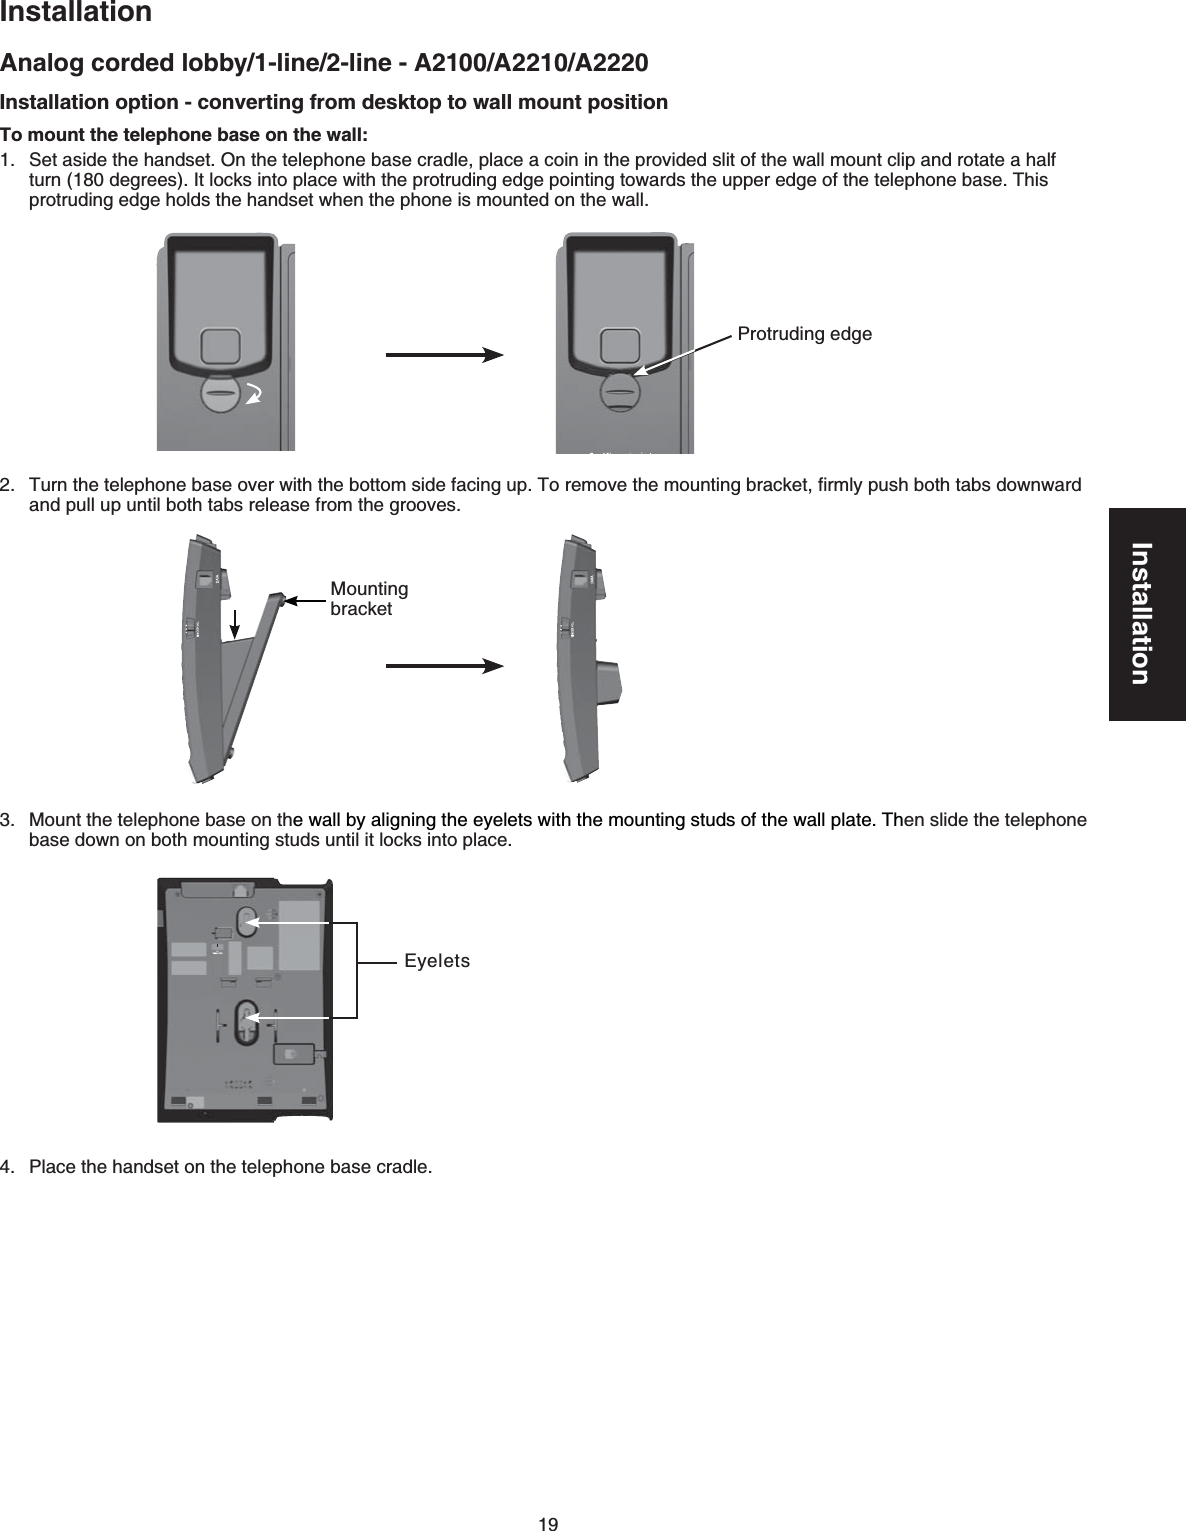 19InstallationAnalog corded lobby/1-line/2-line - A2100/A2210/A2220InstallationInstallation option - converting from desktop to wall mount positionTo mount the telephone base on the wall:Set aside the handset. On the telephone base cradle, place a coin in the provided slit of the wall mount clip and rotate a half turn (180 degrees). It locks into place with the protruding edge pointing towards the upper edge of the telephone base. This protruding edge holds the handset when the phone is mounted on the wall.Turn the telephone base over with the bottom side facing up. To remove the mounting bracket, ﬁrmly push both tabs downward  and pull up until both tabs release from the grooves.Mount the telephone base on the wall by aligning the eyelets with the mounting studs of the wall plate. Then slide the telephone base down on both mounting studs until it locks into place.Place the handset on the telephone base cradle.1.2.3.4.Protruding edgeMounting bracketEyelets